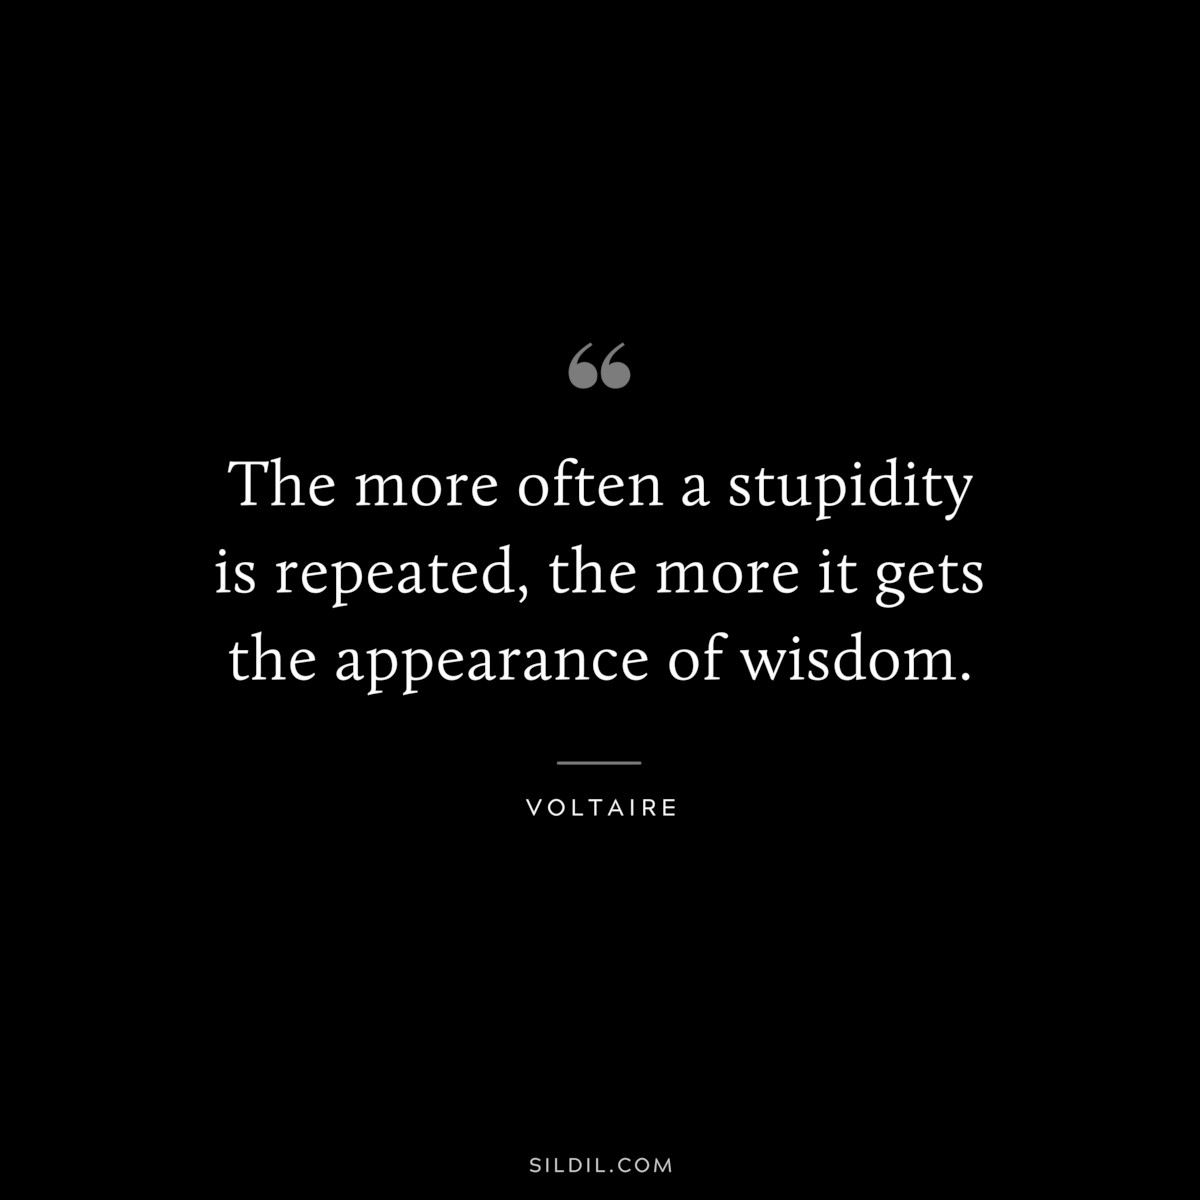 The more often a stupidity is repeated, the more it gets the appearance of wisdom. ― Voltaire